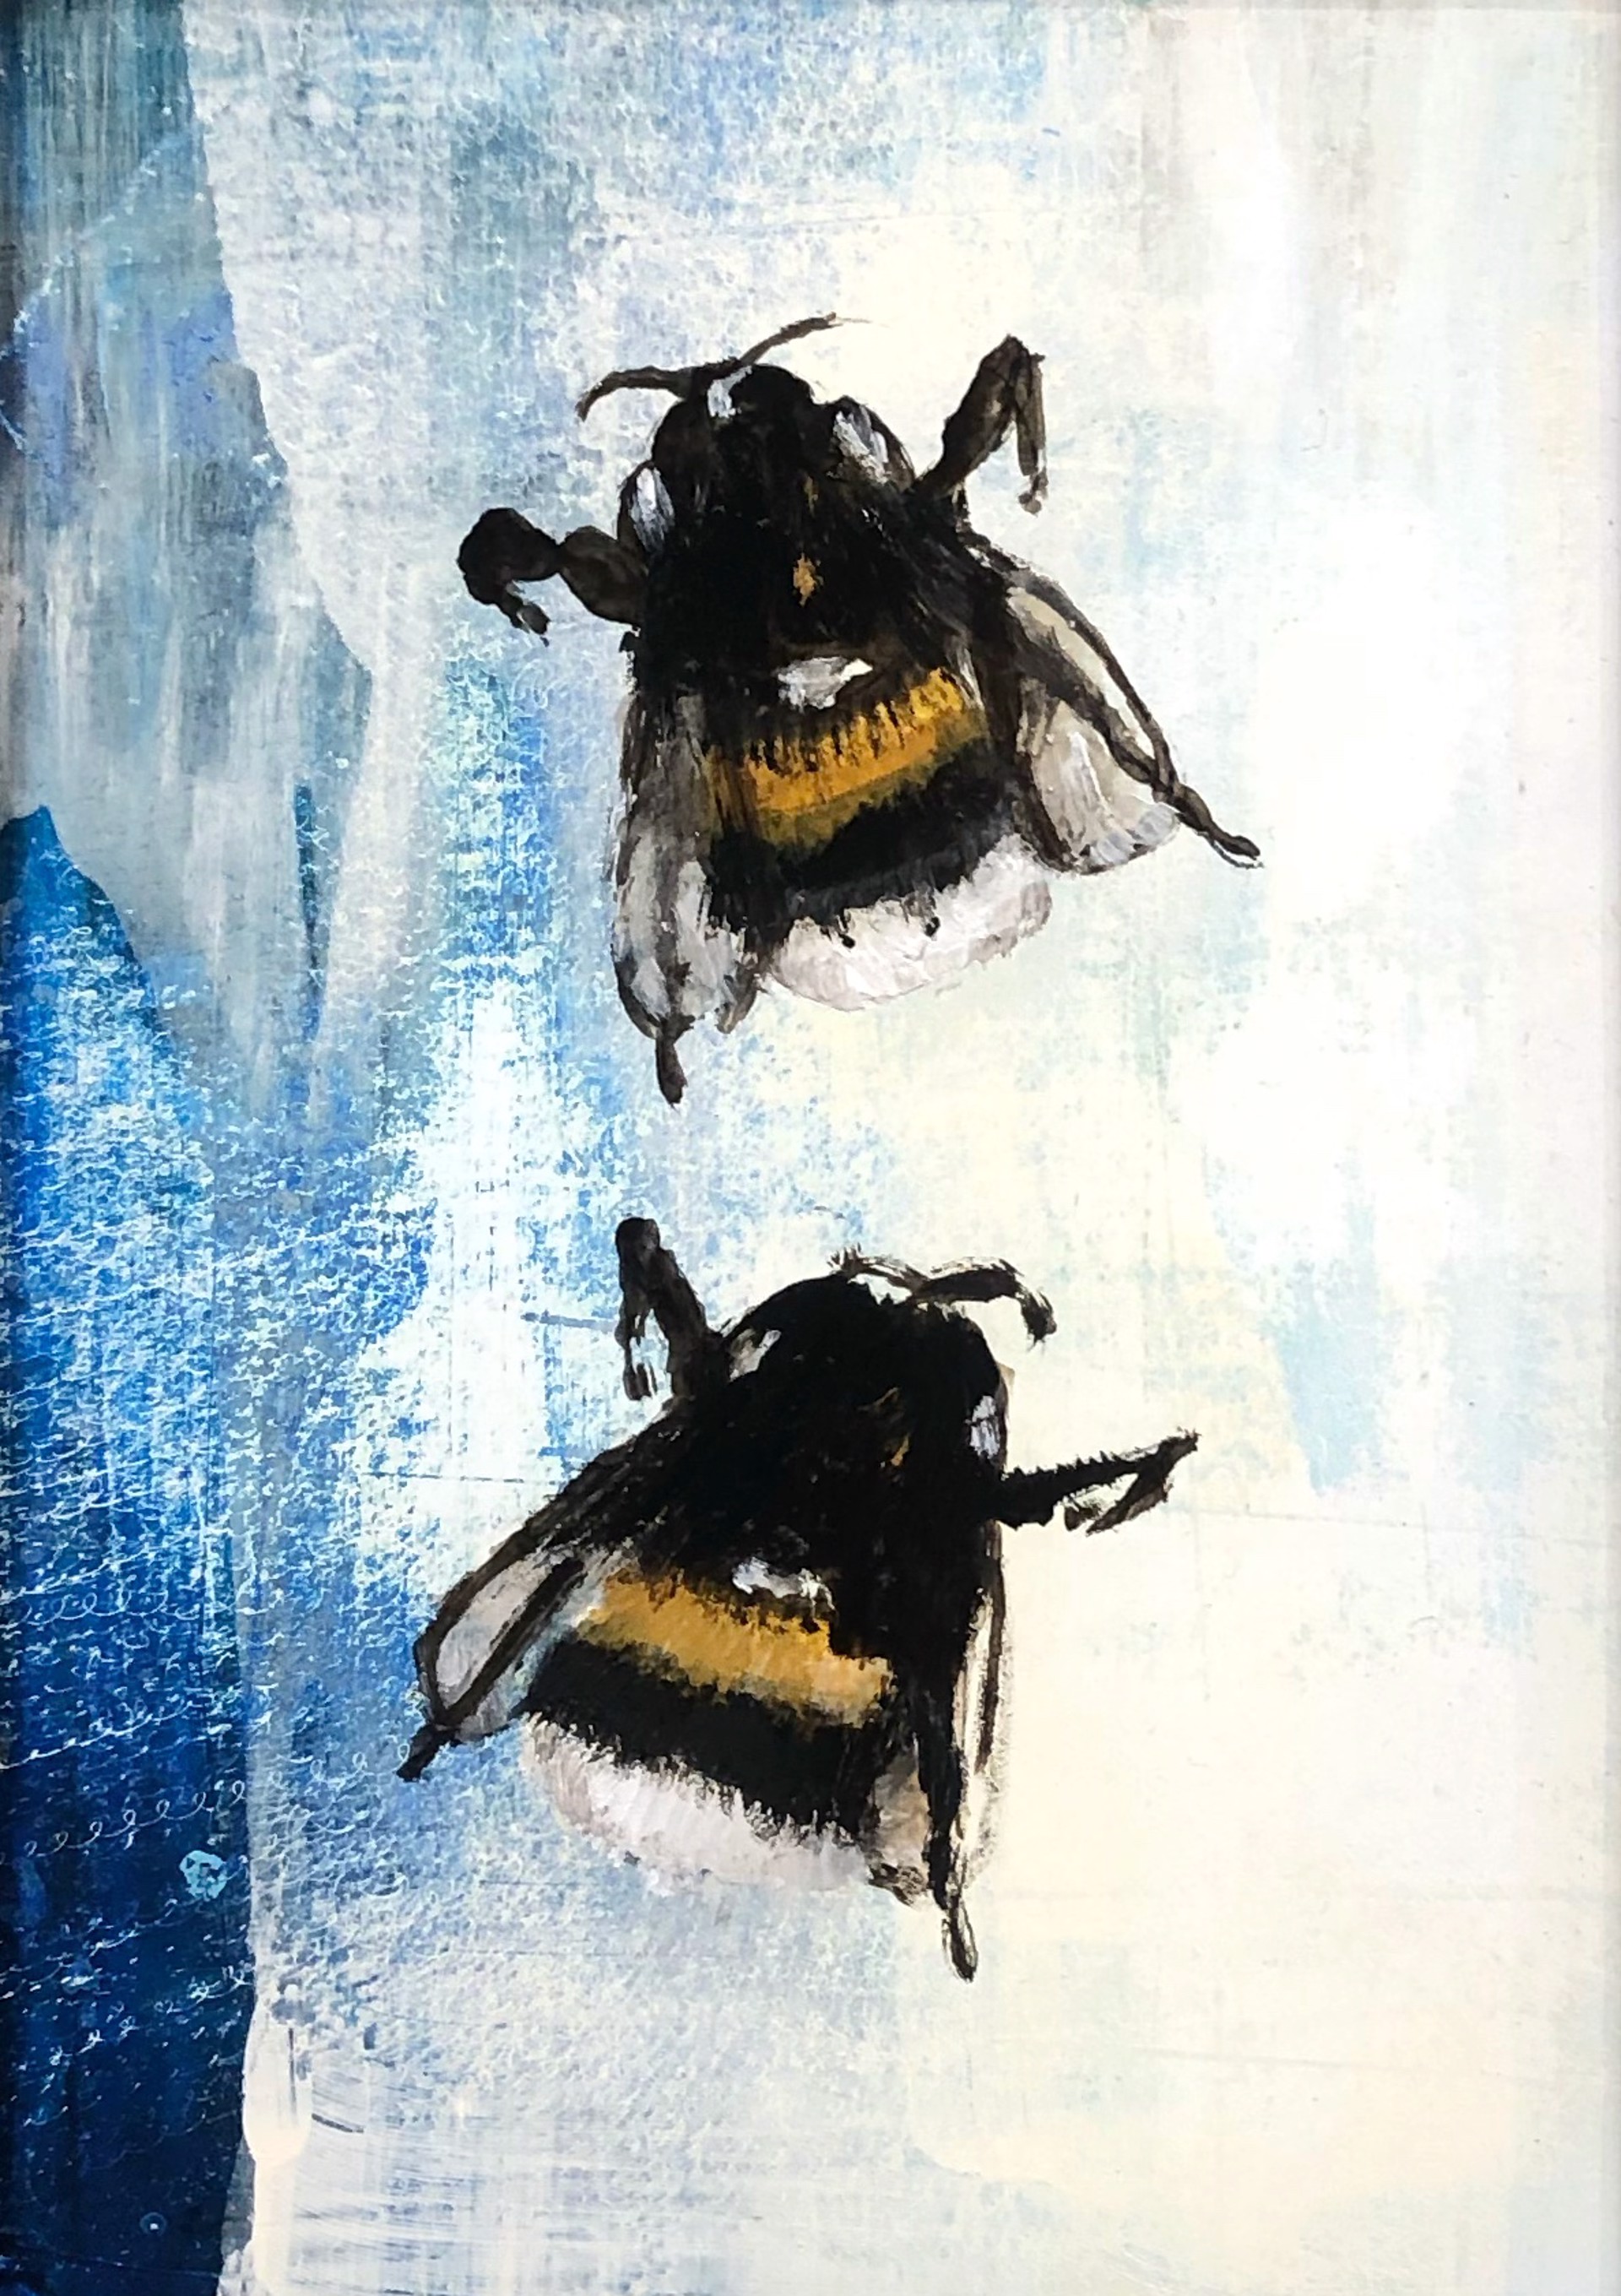 Original Oil Painting Of Two Bumble Bees On A Abstract Blue NA White Background With A Warm Silver Frame By Jenna Von Benedikts